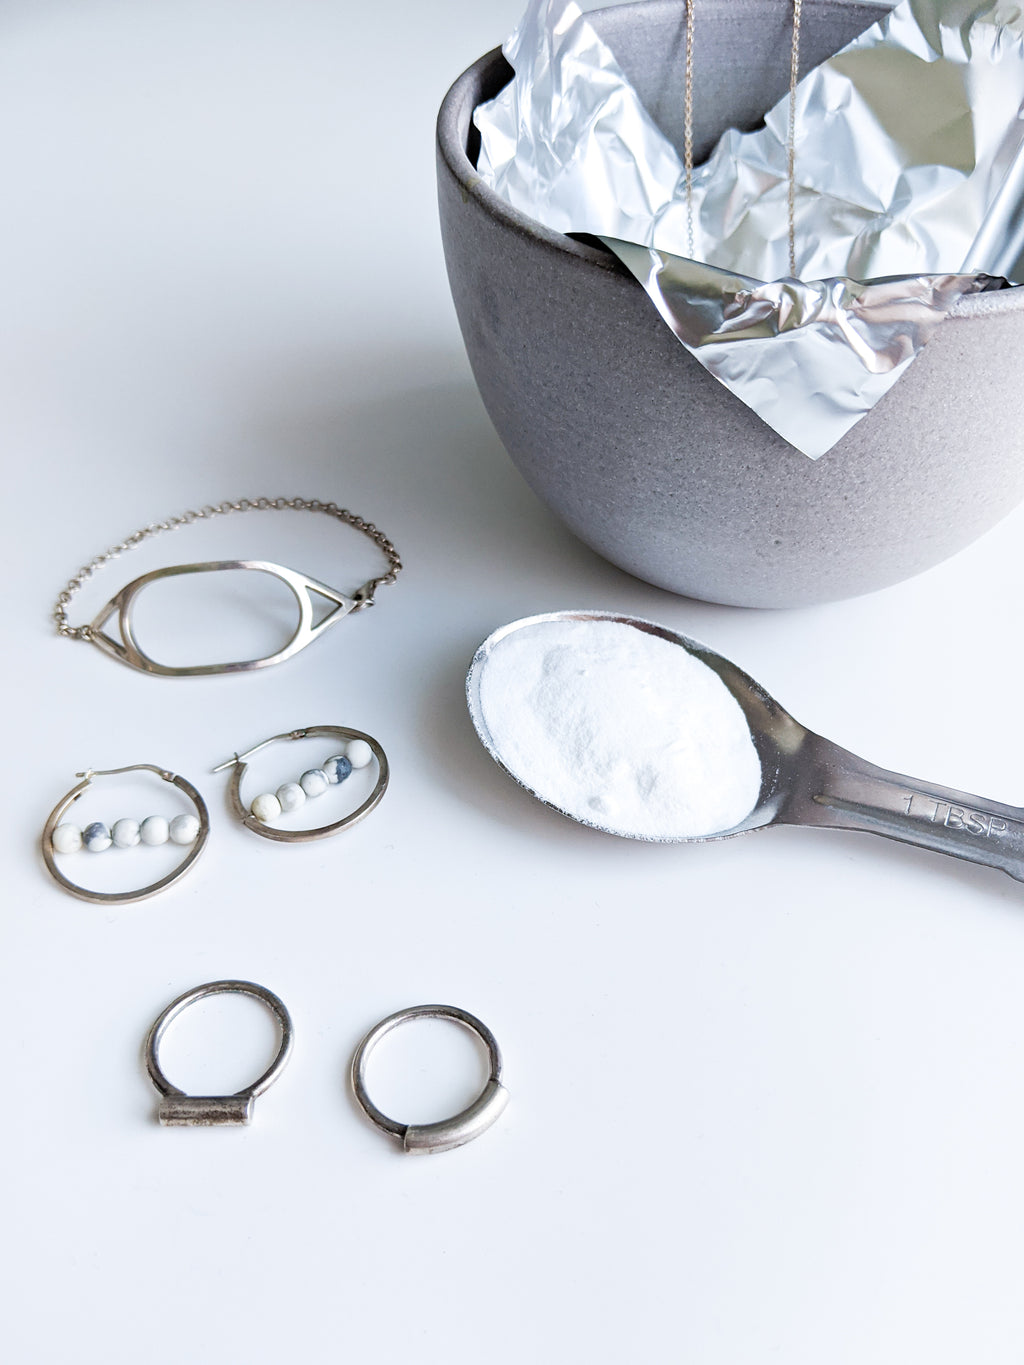 How to clean sterling silver jewelry with backing soda